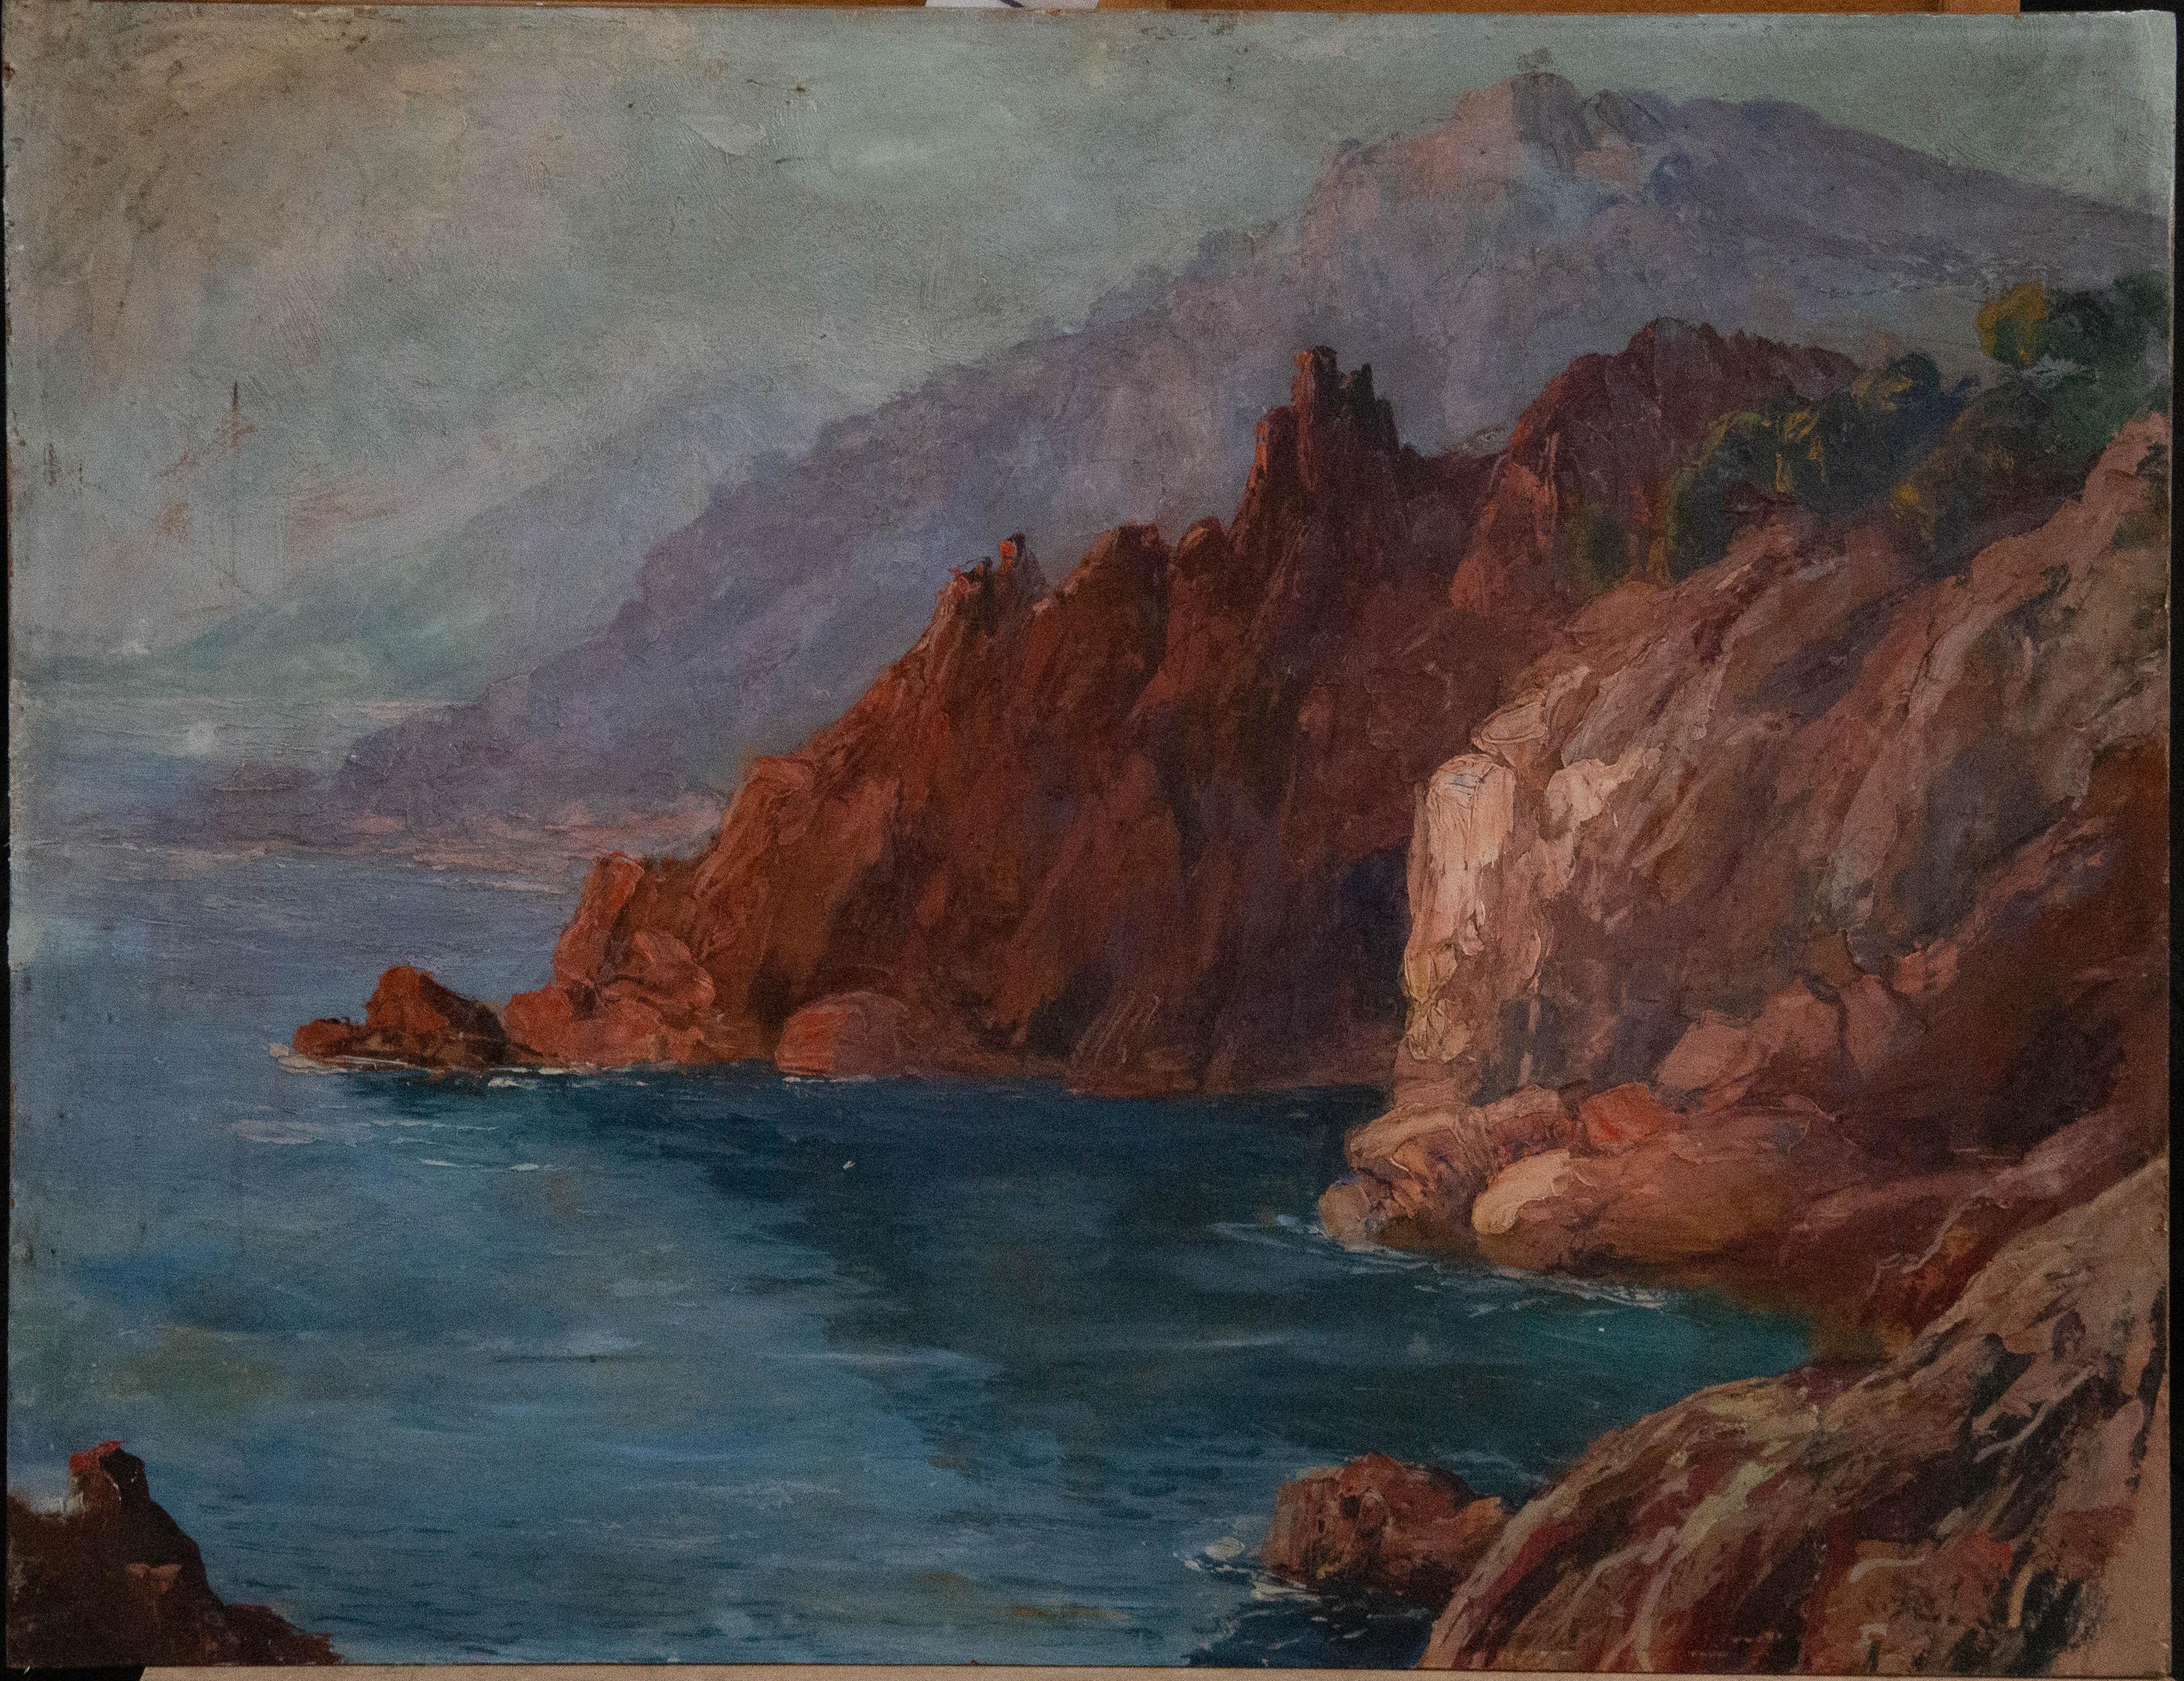 A striking coastal scene in oil showing the red cliffs of an Italian coastline. The painting has some areas of impasto which adds to the texture of the rock and waves on the shore. The painting is unsigned, on board. On board.
